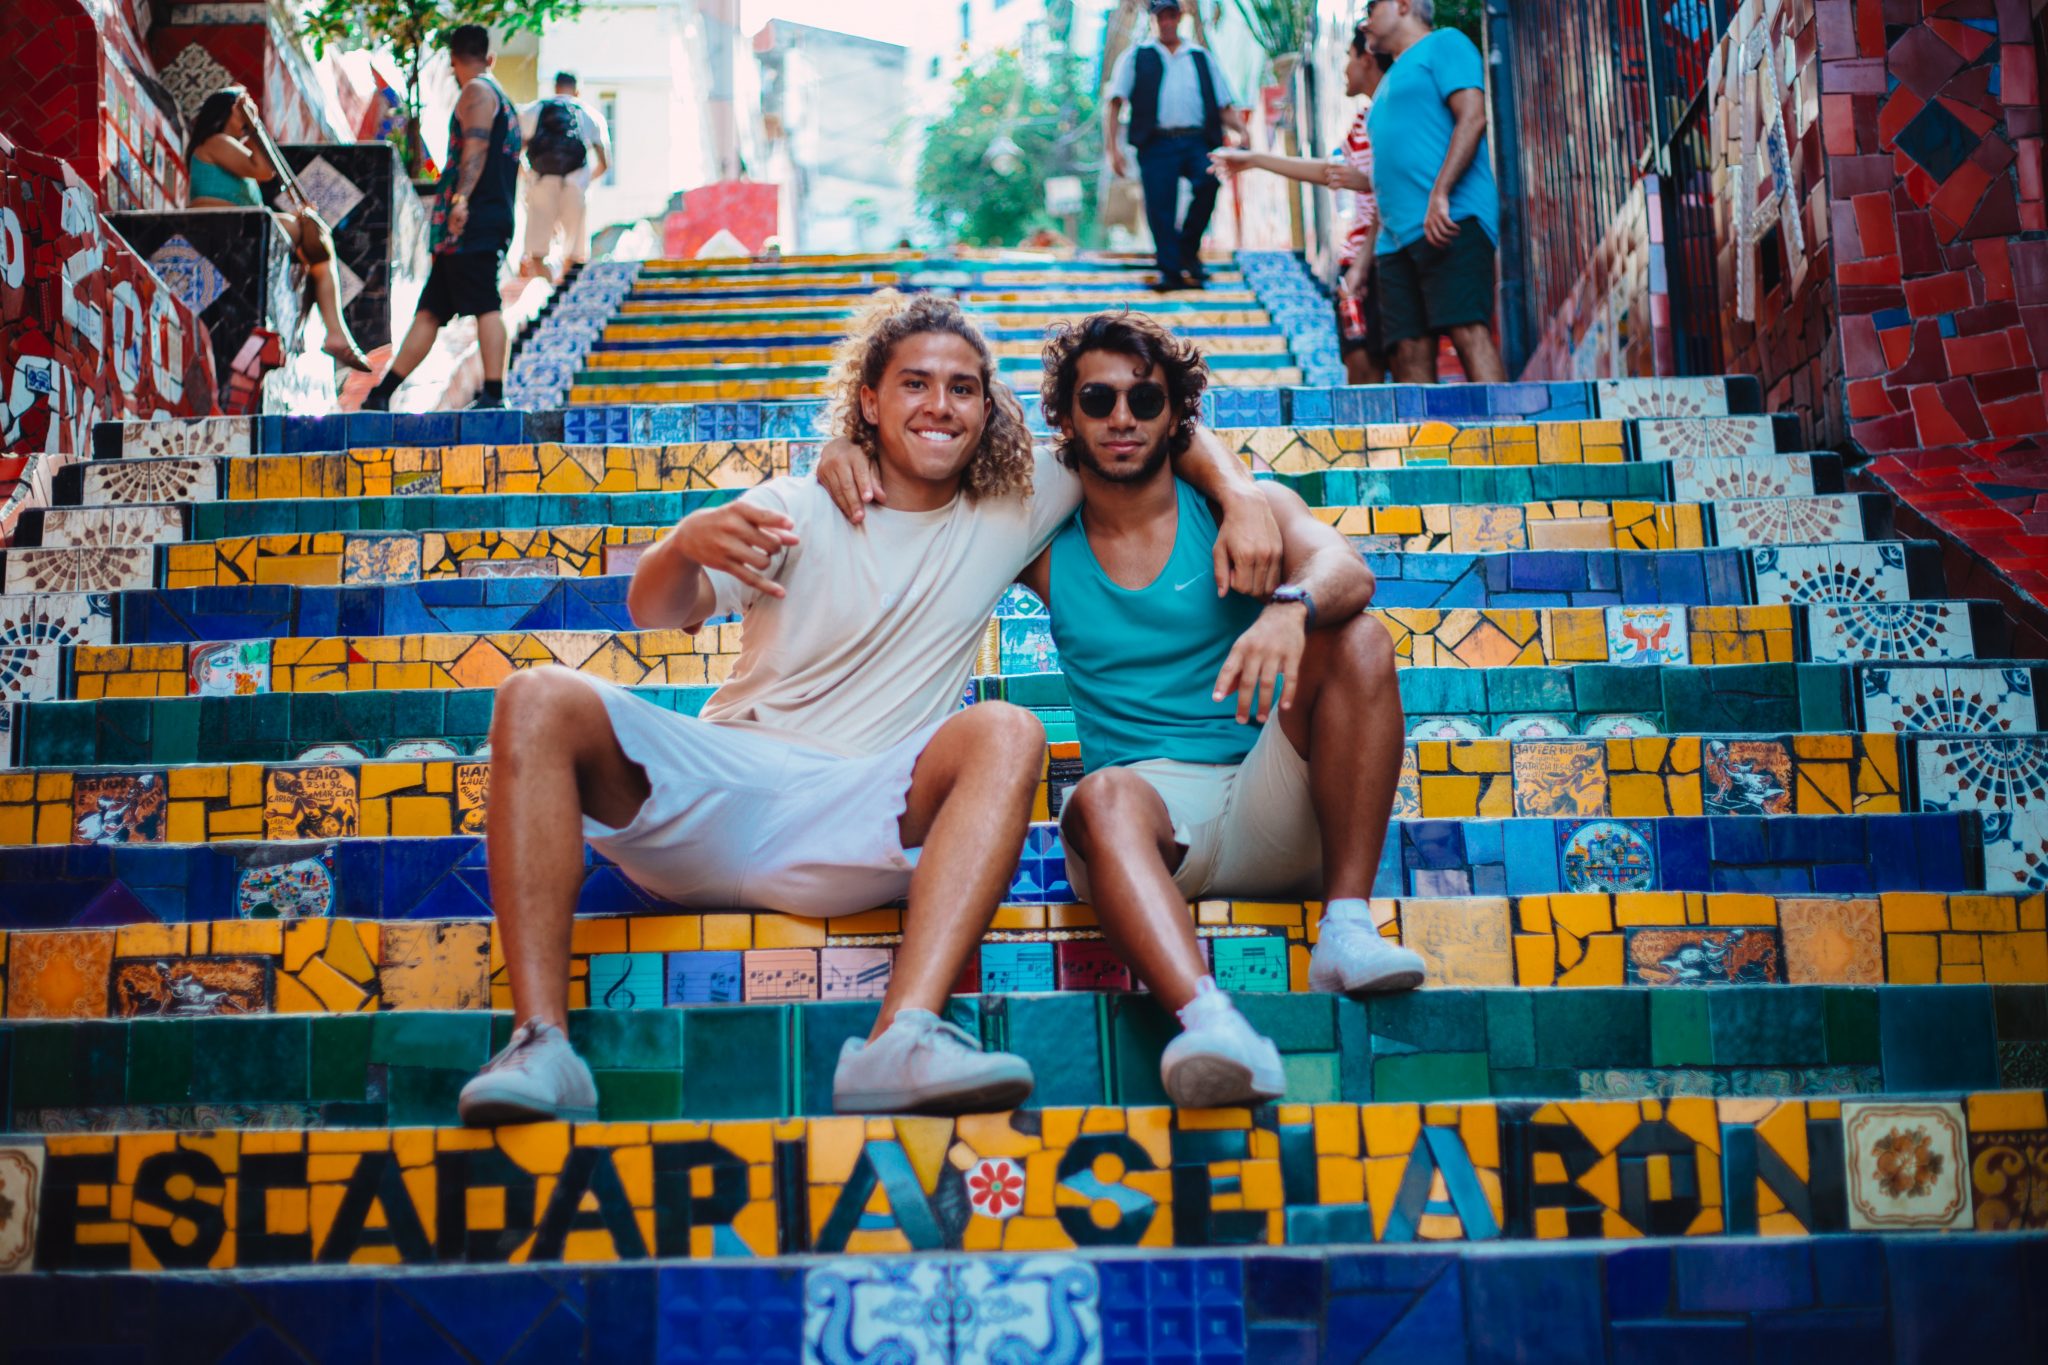 Two men pose with their arms around each other, sitting on the Escadaria Selarón staircase in Rio de Janeiro. The stairs are mostly empty except for a few other tourists towards the top.